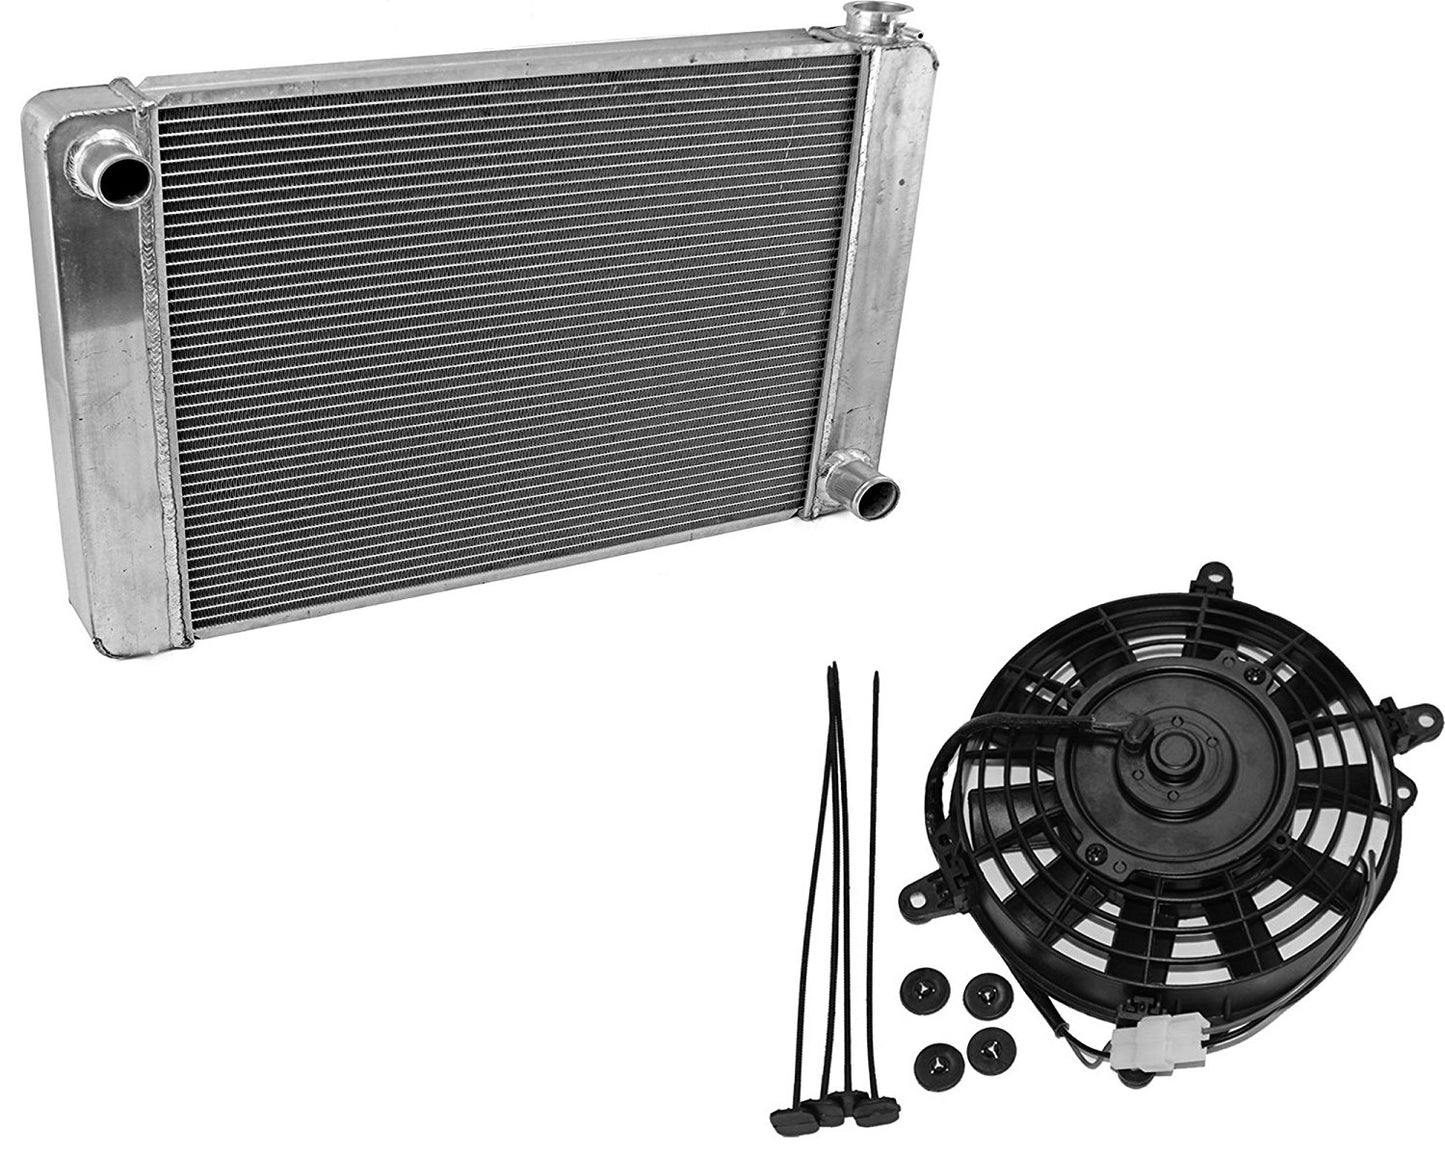 Fabricated Aluminum Radiator 30" x 19" x3" Overall For SBC BBC Chevy GM & 8" Staight Blade Electric Radator Cooling Fan